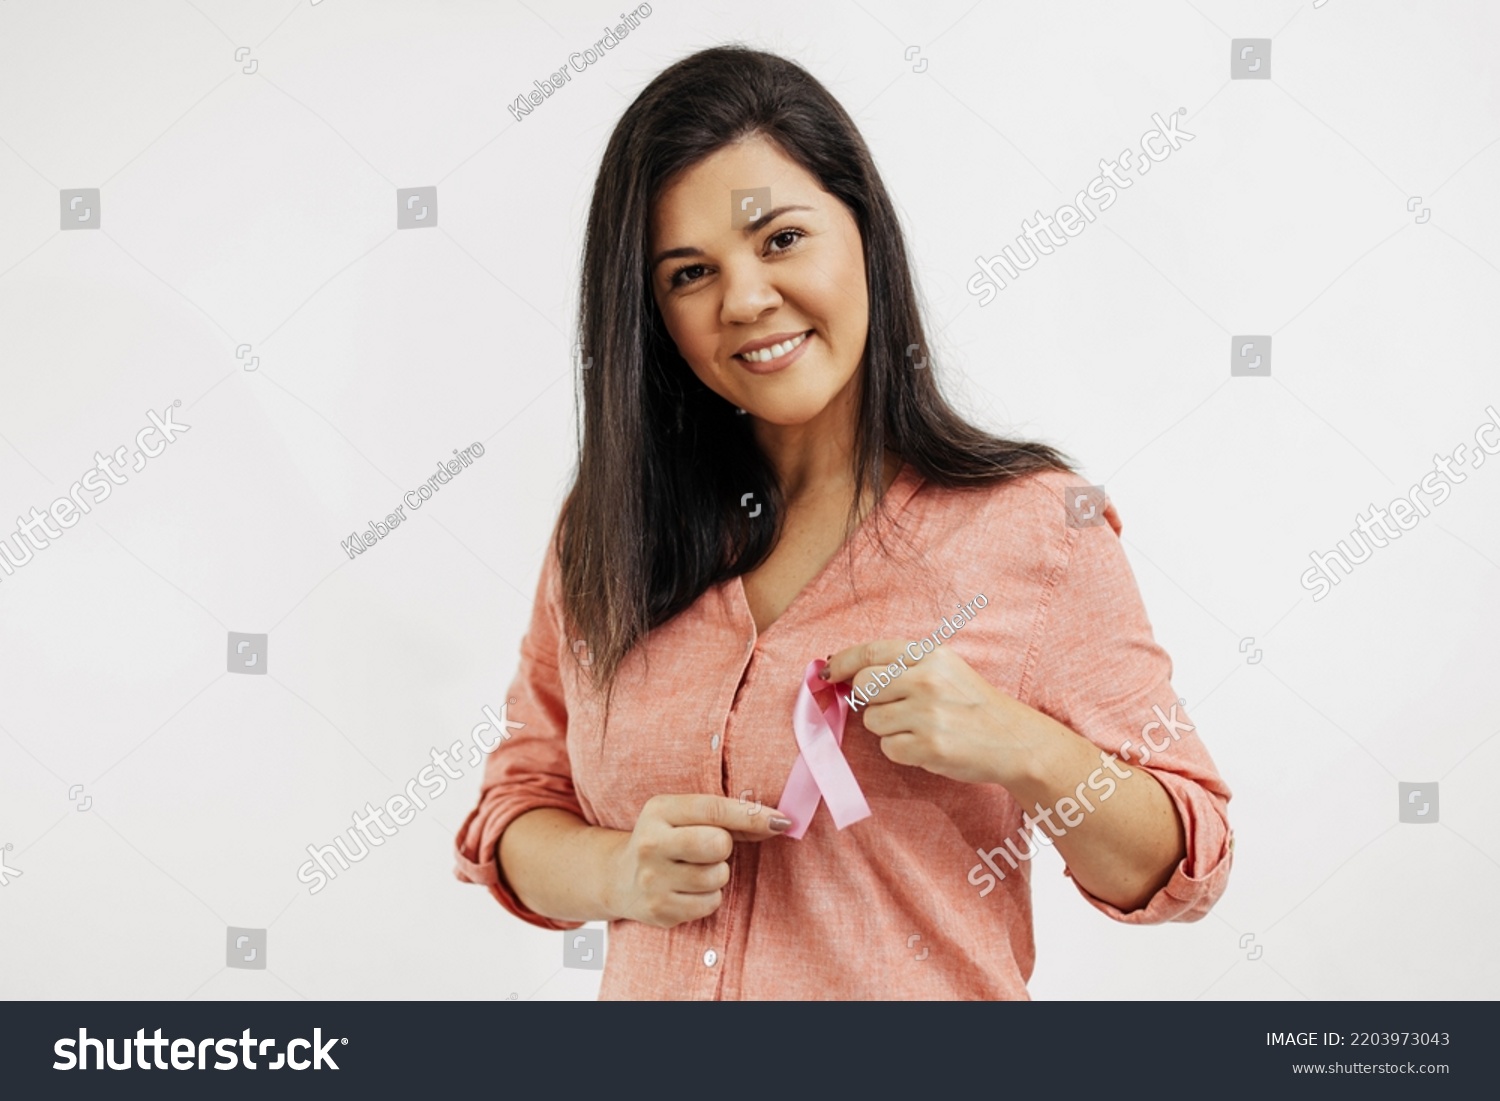 Young Brazilian woman holding breast cancer ribbon over white background #2203973043